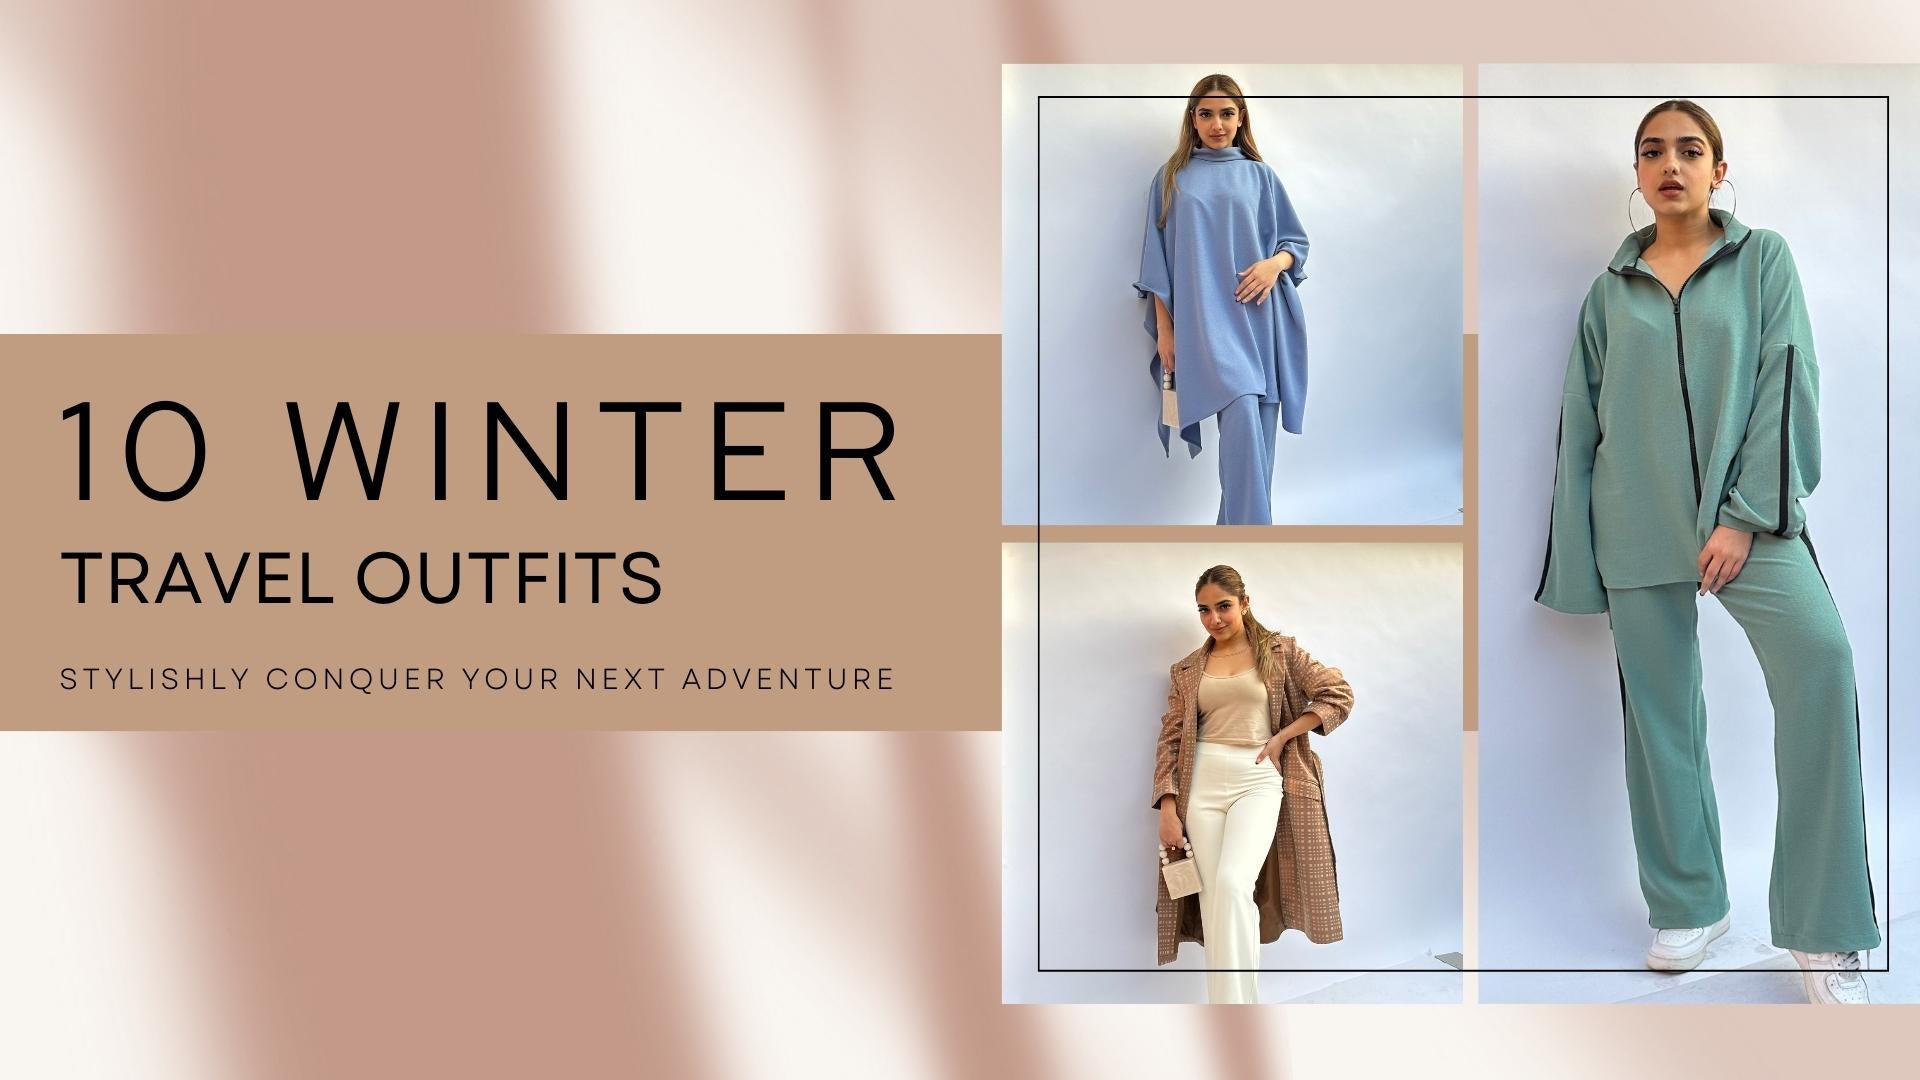 10 Winter Travel Outfits: Stylishly Conquer Your Next Adventure 